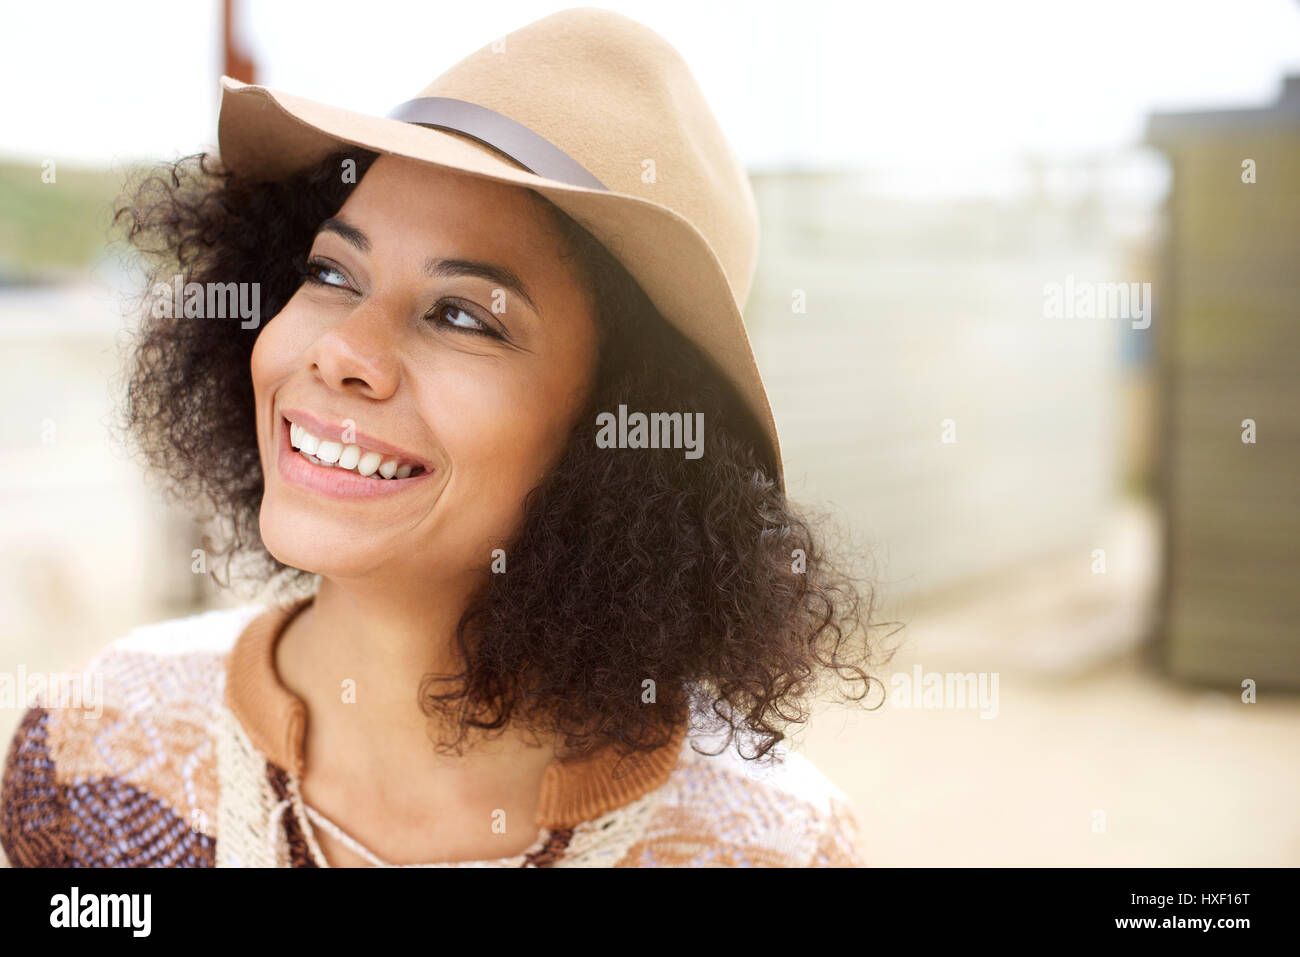 Close up portrait of a young african american woman smiling with hat Banque D'Images